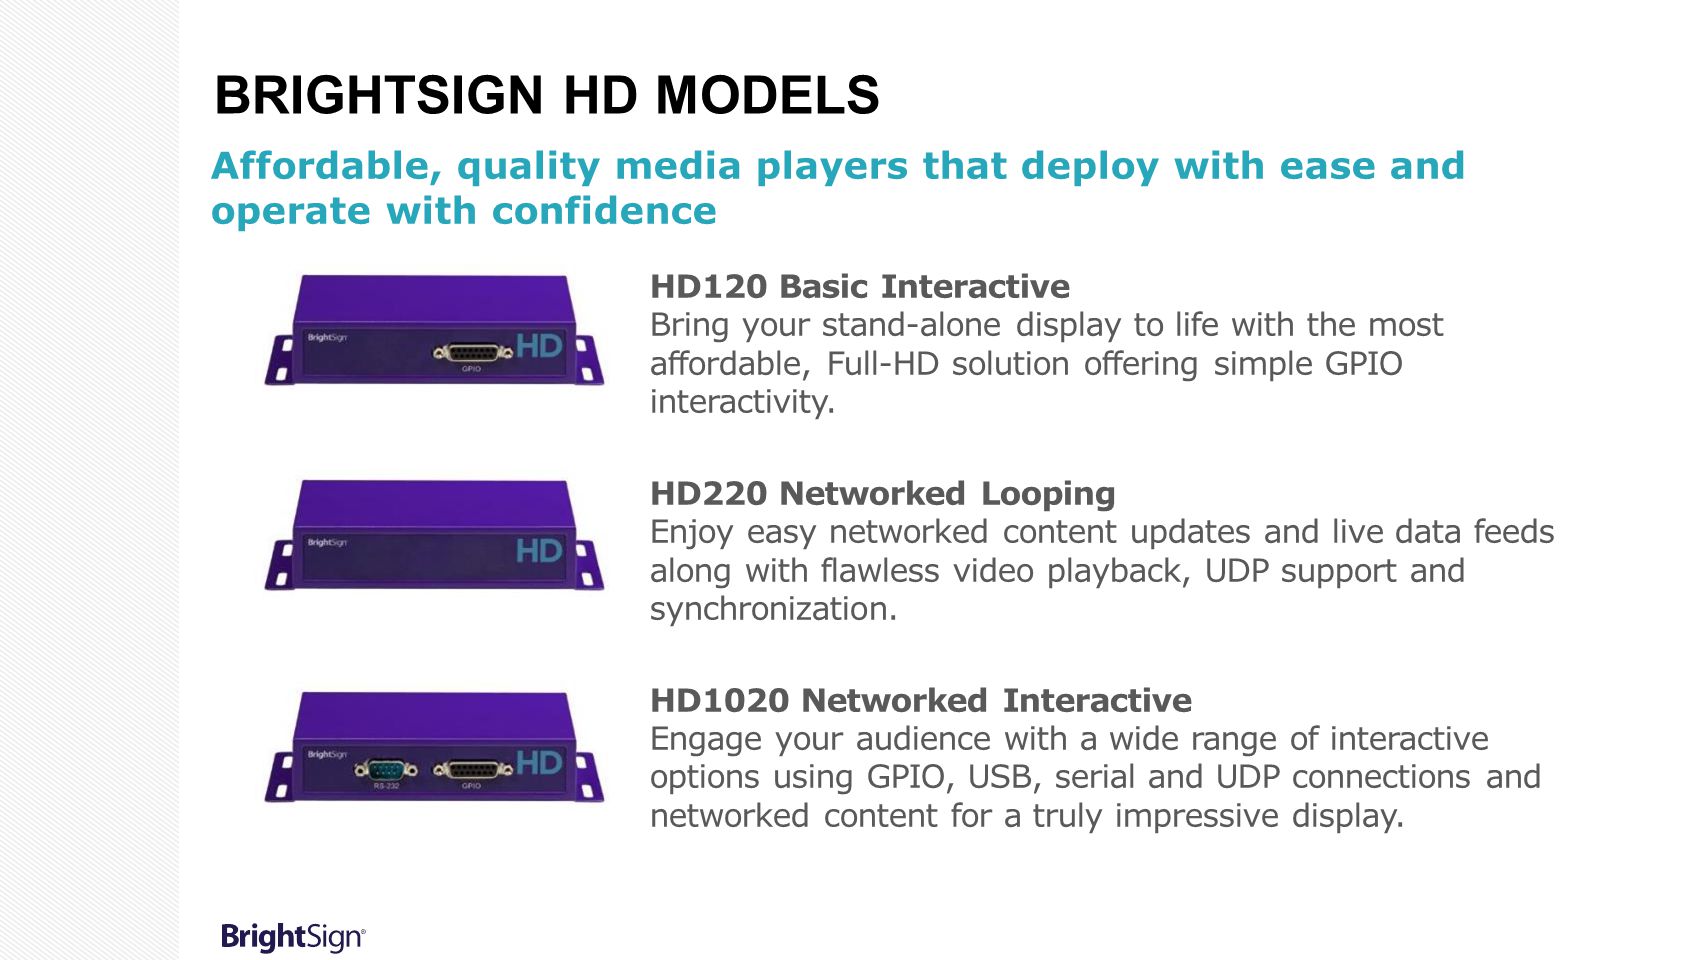 BrightSign HD models Affordable, quality media players that deploy with ease and operate with confidence.